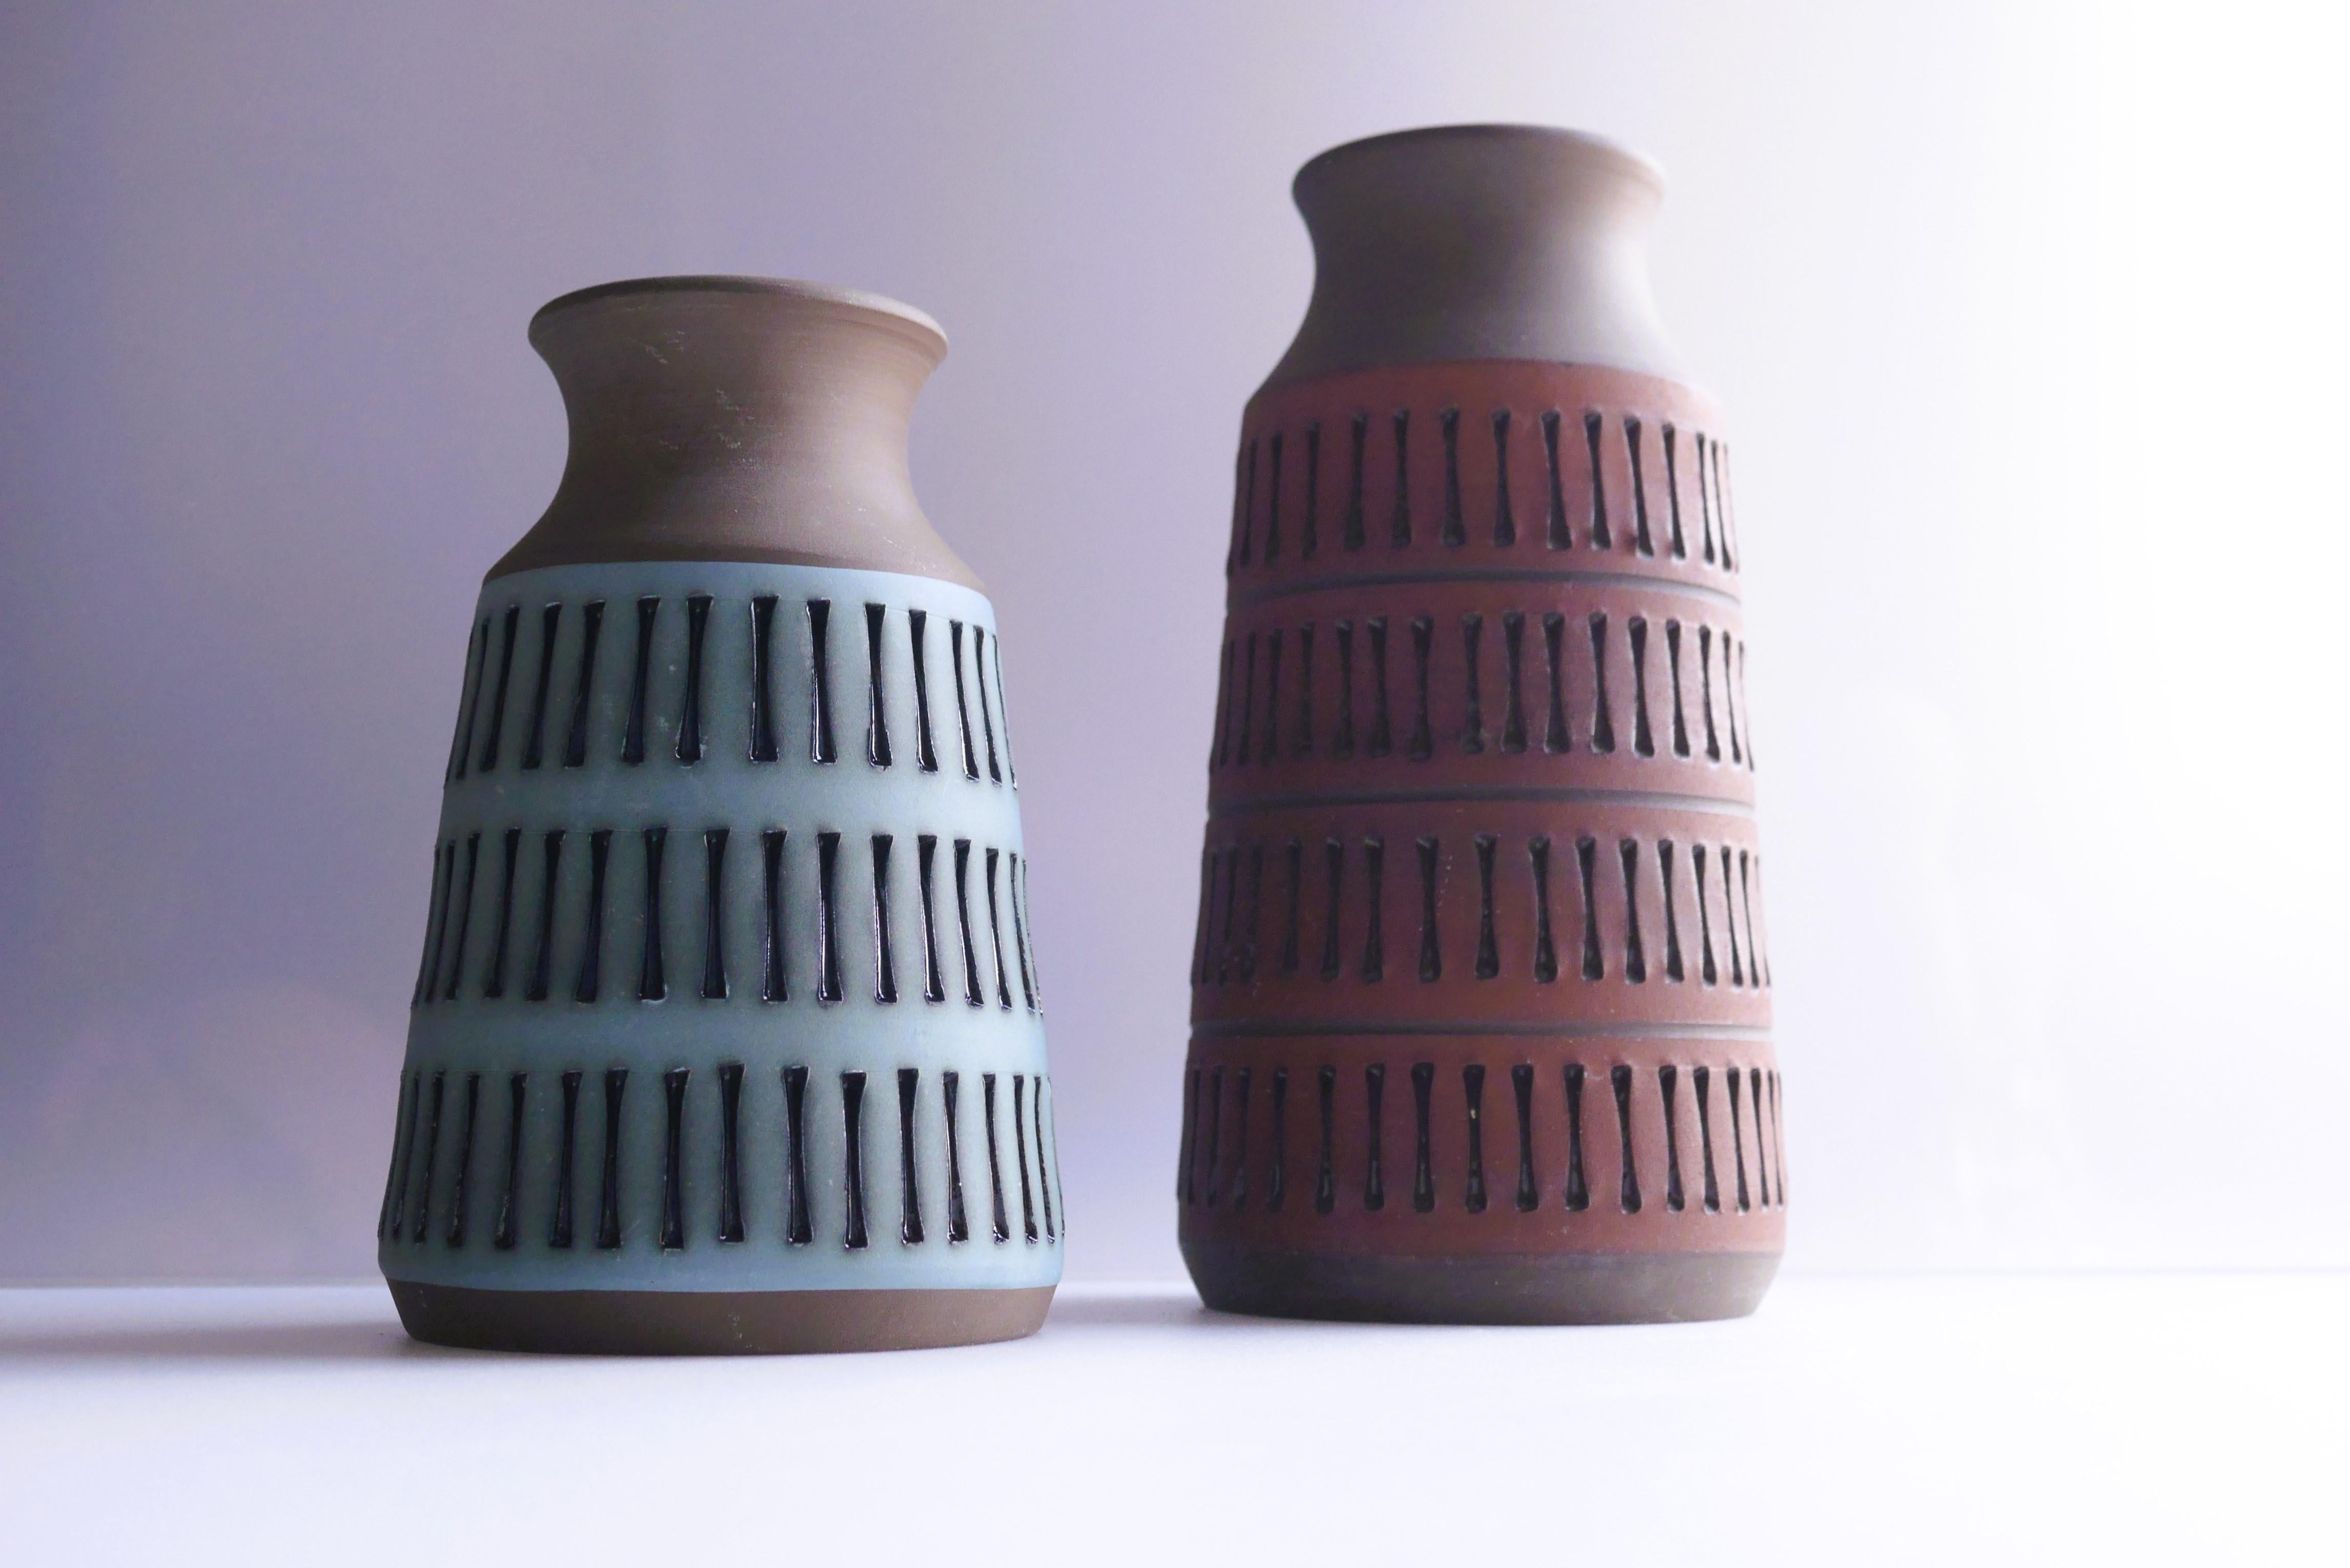 Hand-Crafted Swedish Deep Red Brutalist Art Vase, by Tomas Anagrius for Alingsås